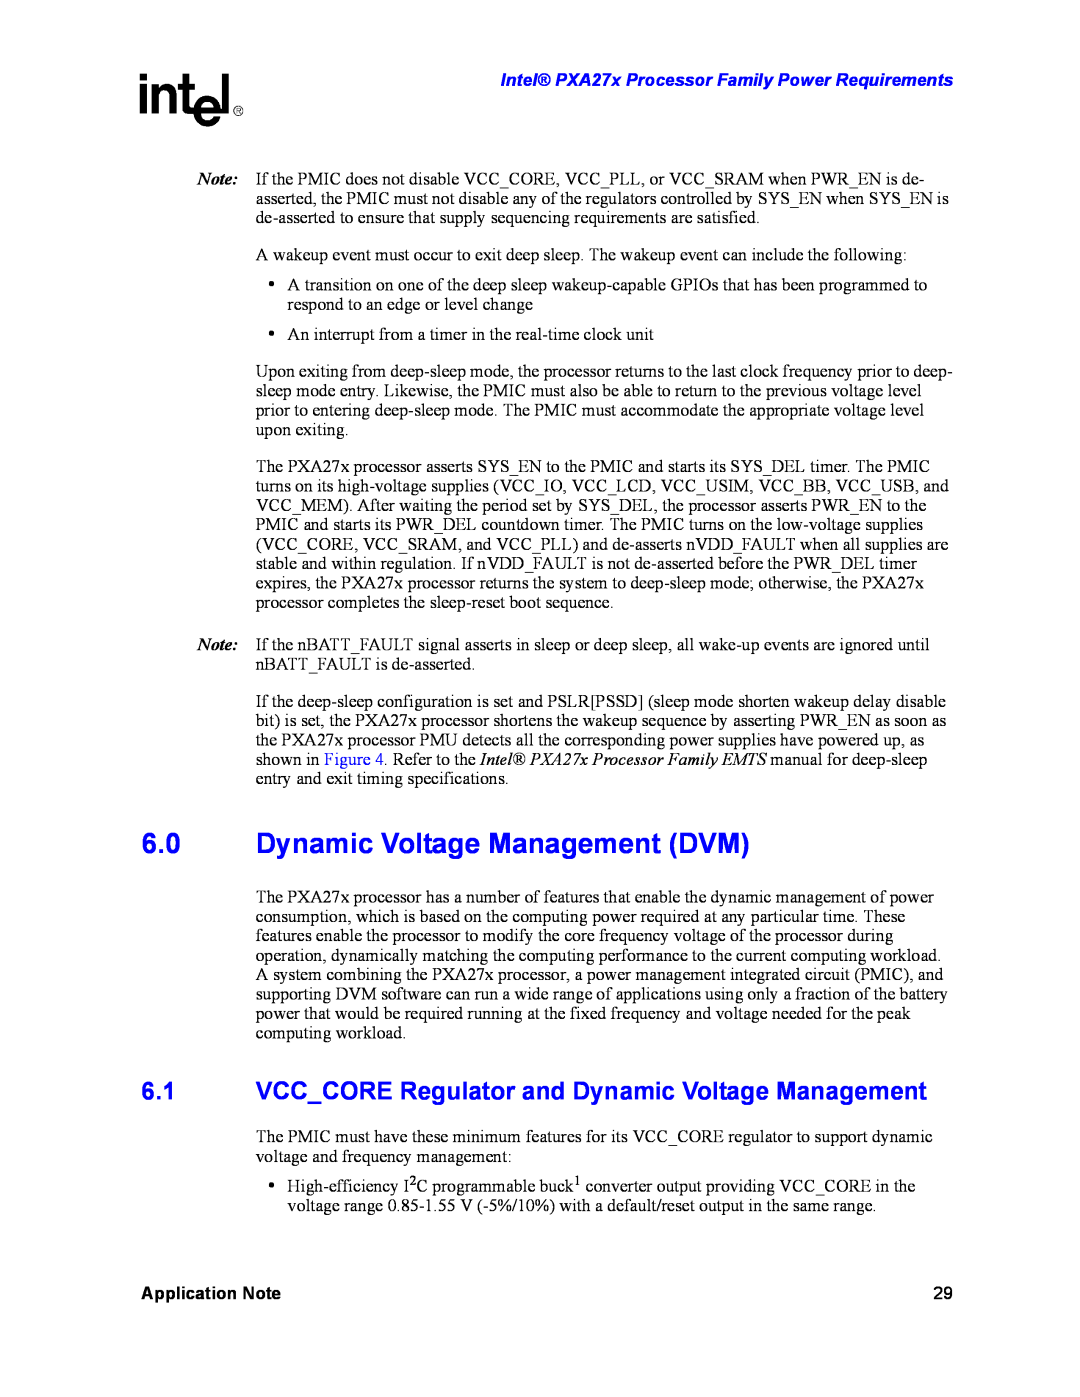 Intel PXA27X manual Dynamic Voltage Management DVM, VCCCORE Regulator and Dynamic Voltage Management, Application Note 